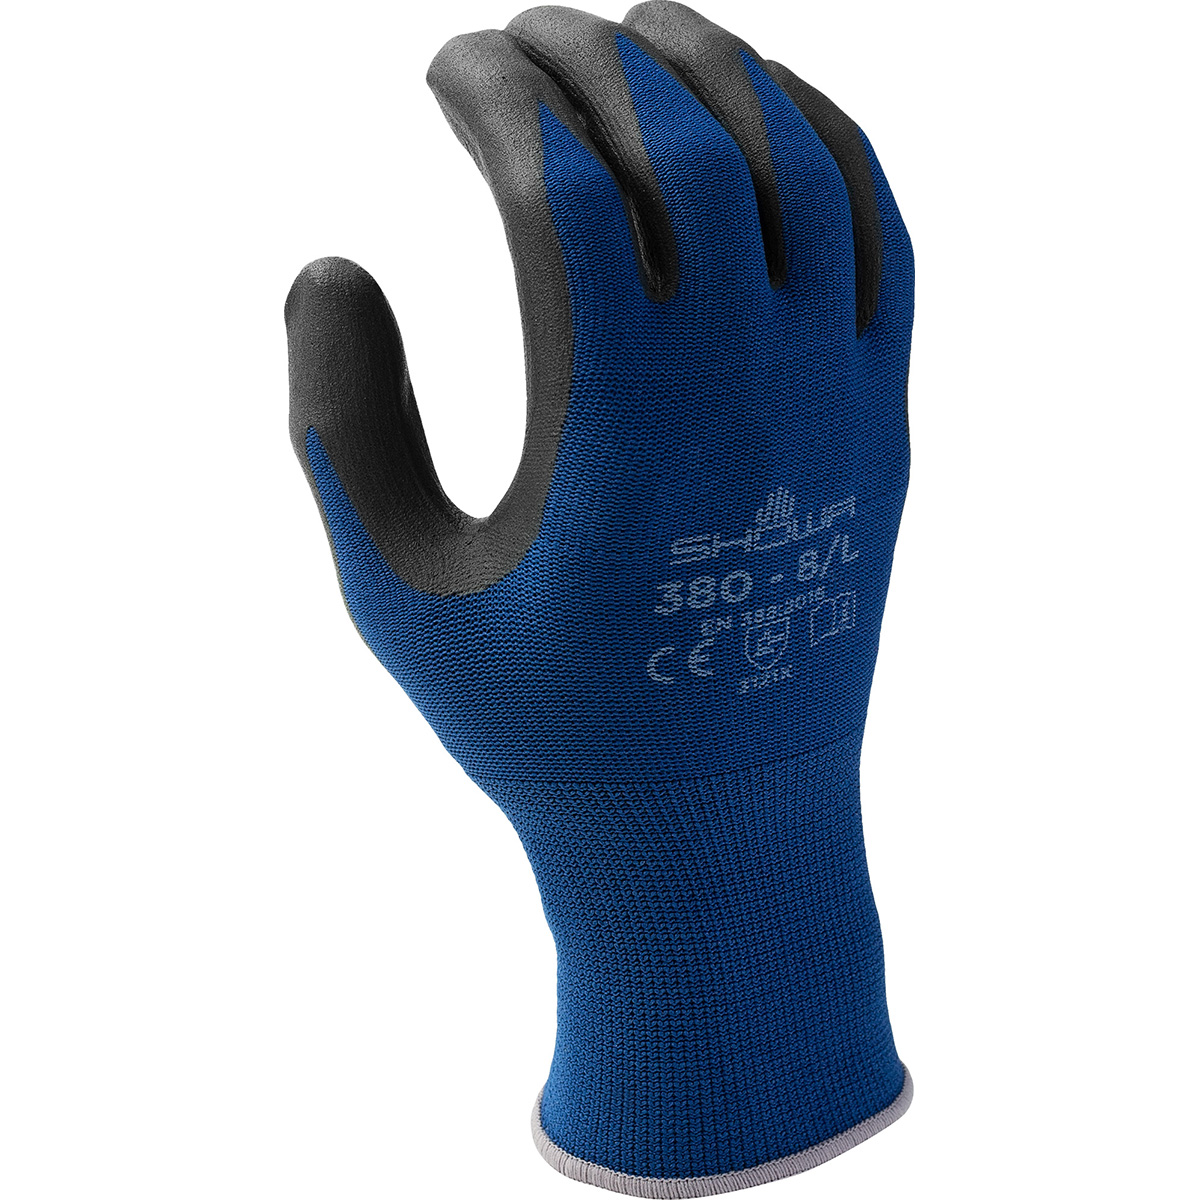 General purpose patented waffle pattern foamed nitrile-coated, palm dipped, blue w/black coating, 13 gauge seamless, knitted liner, large